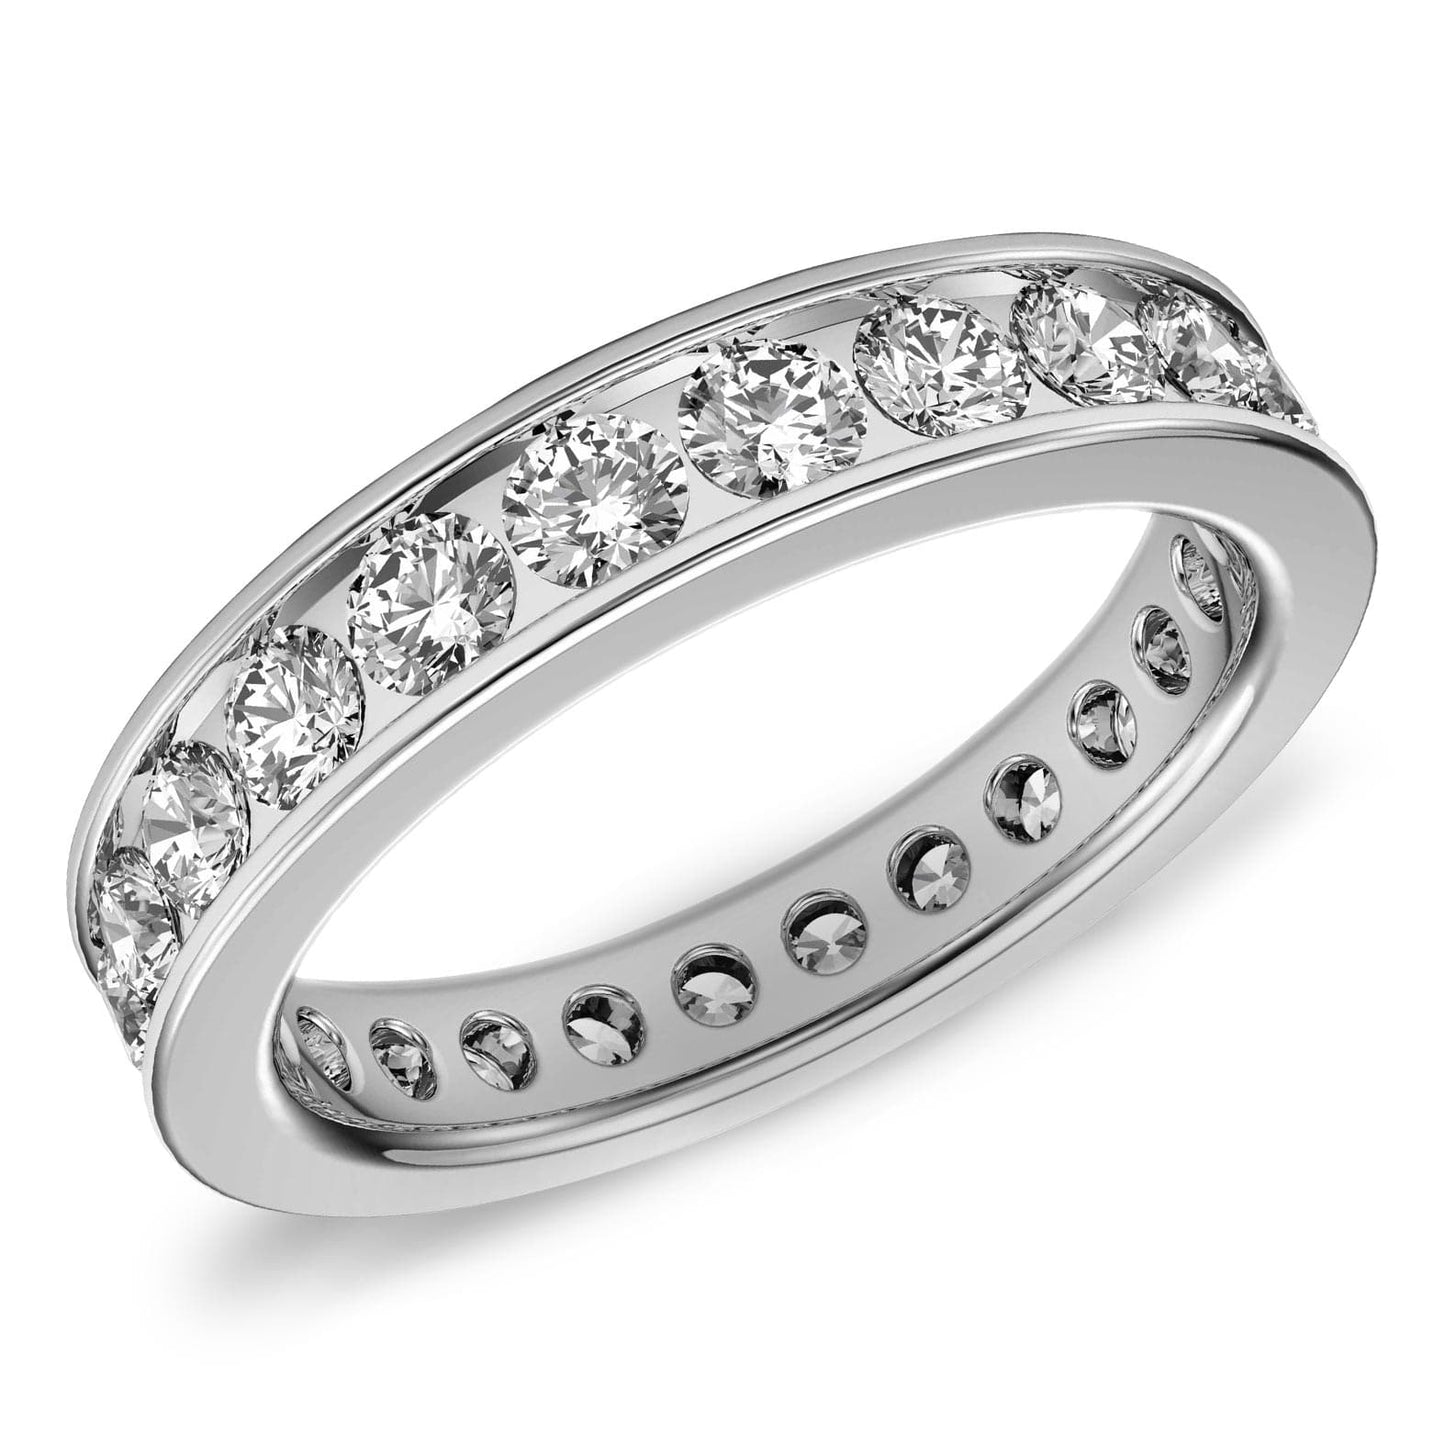 2ct Channel Set Round Diamond Eternity Ring in 14k Gold